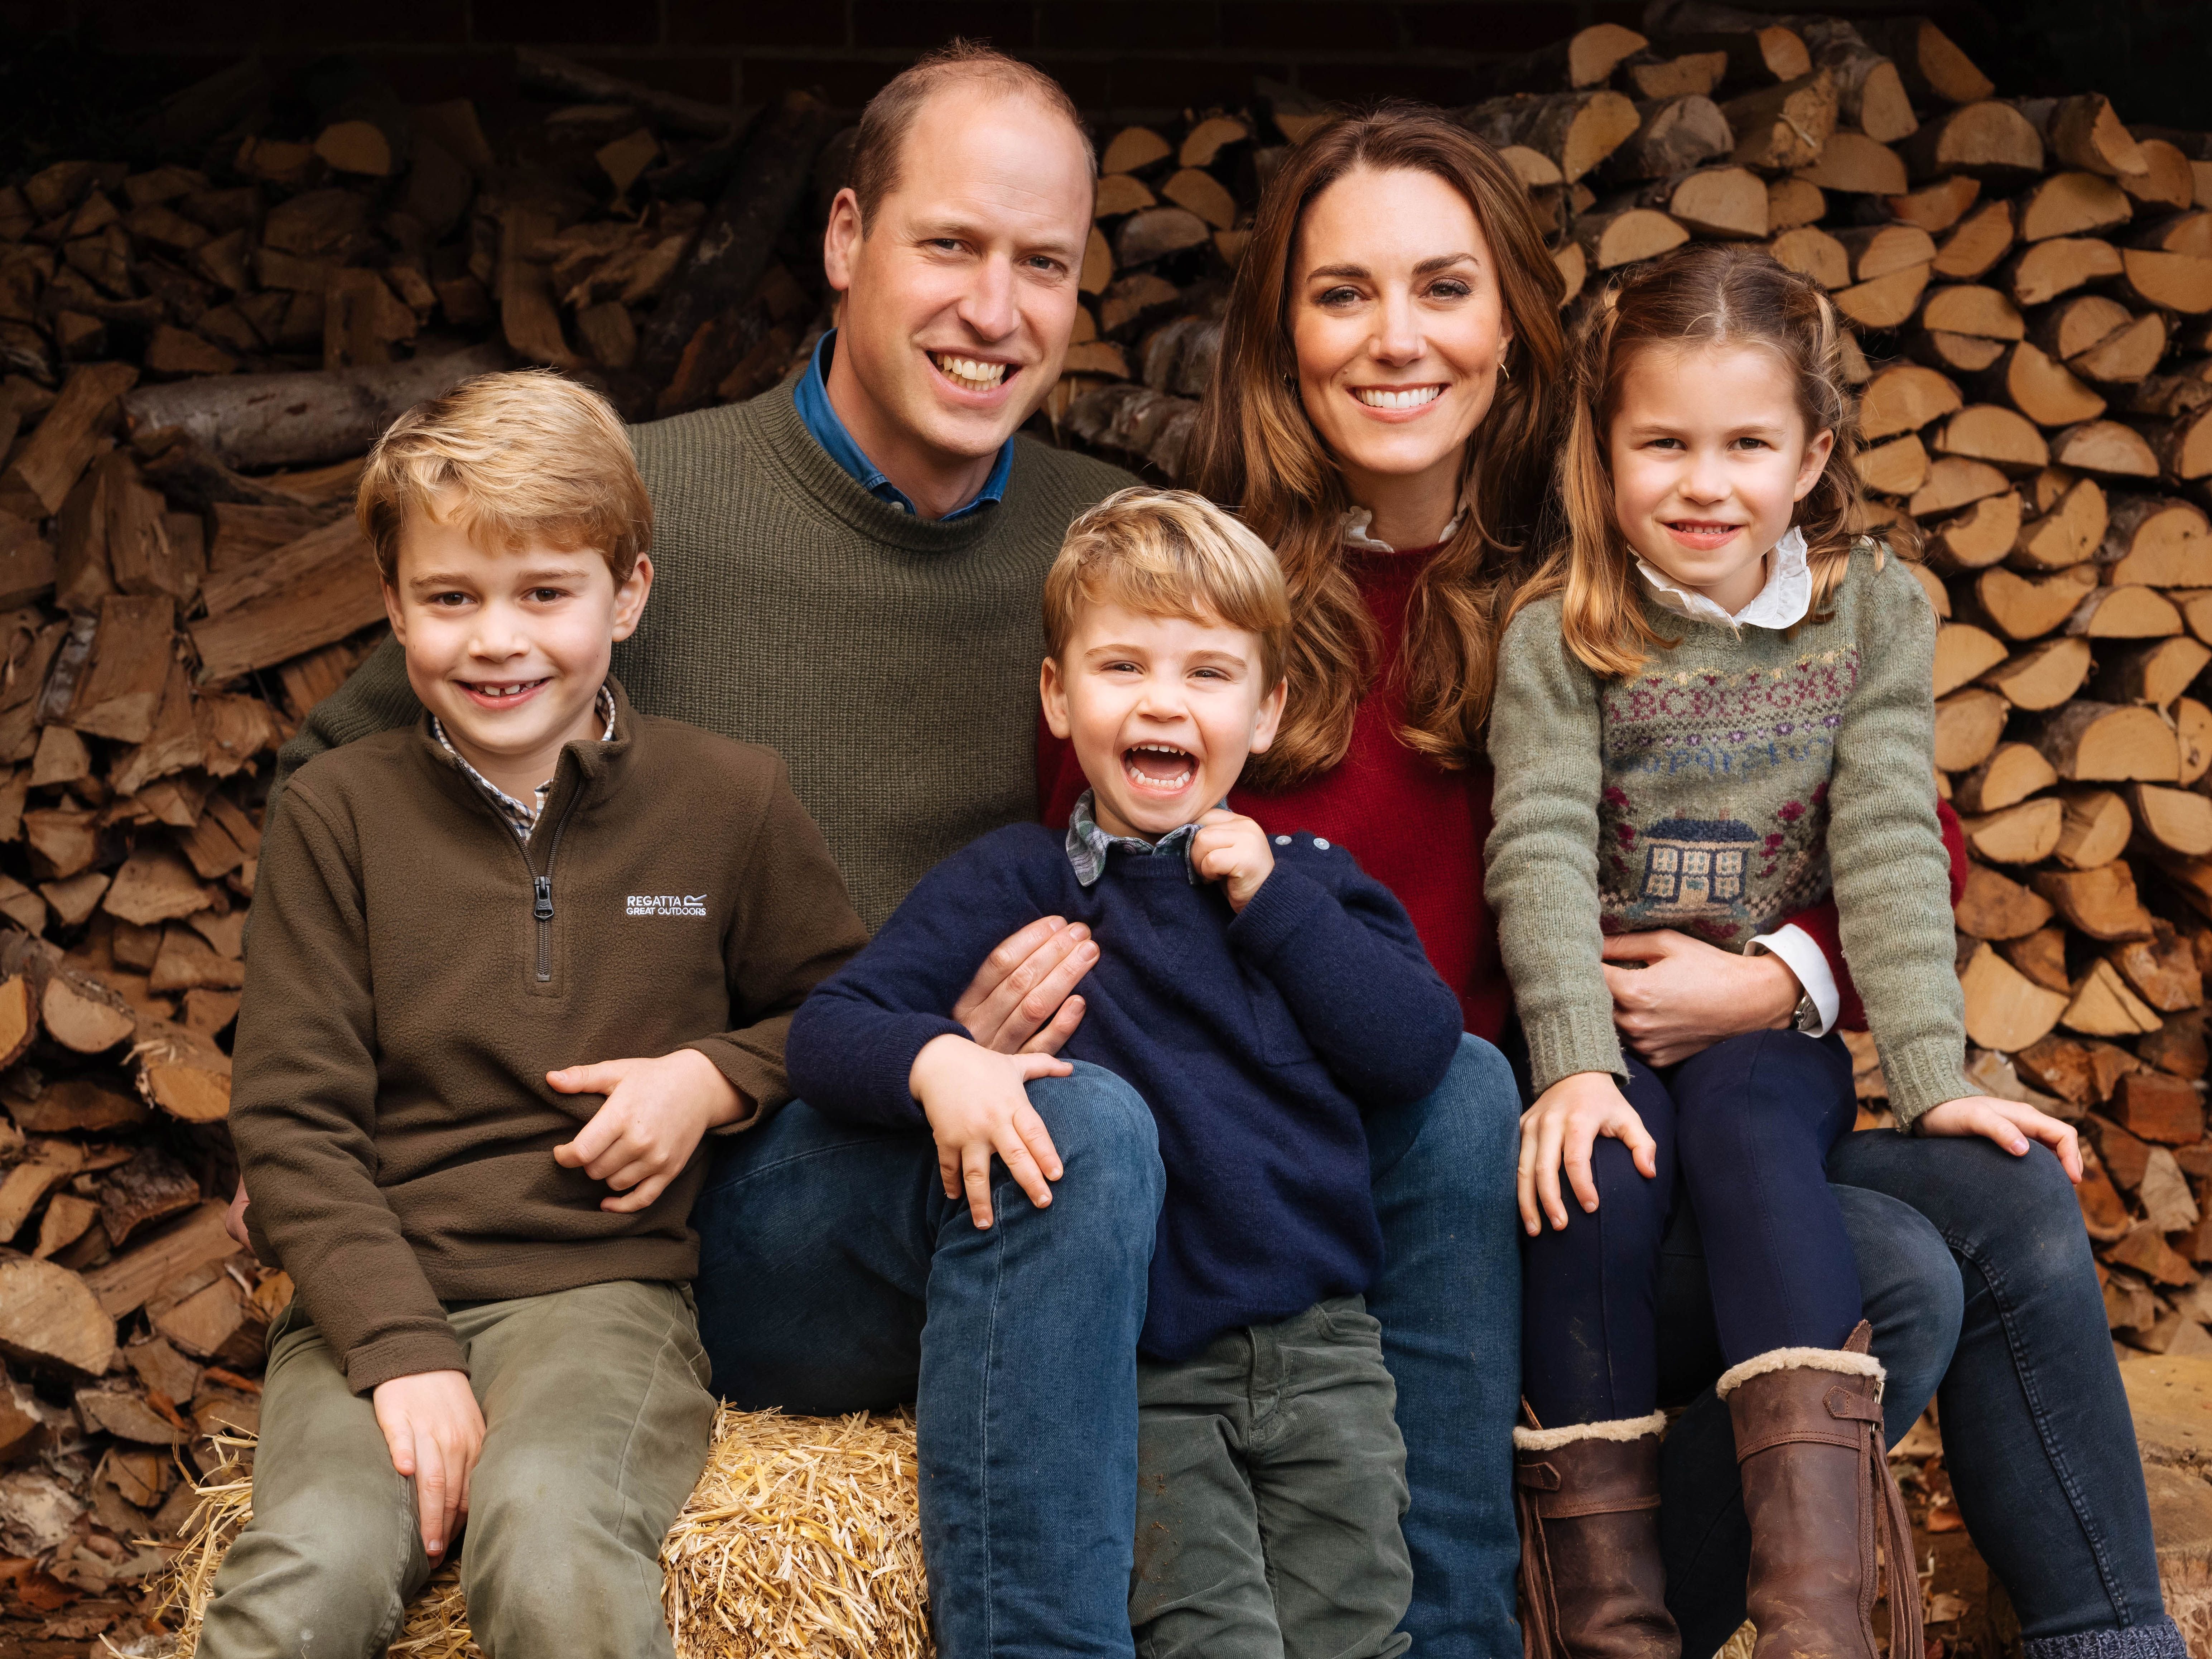 The Duke and Duchess of Cambridge with their three children Prince George, Princess Charlotte, and Prince Louis at Anmer Hall in Norfolk on December 16, 2020 | Photo: Matt Porteous/The Duke and Duchess of Cambridge/Kensington Palace/Getty Images